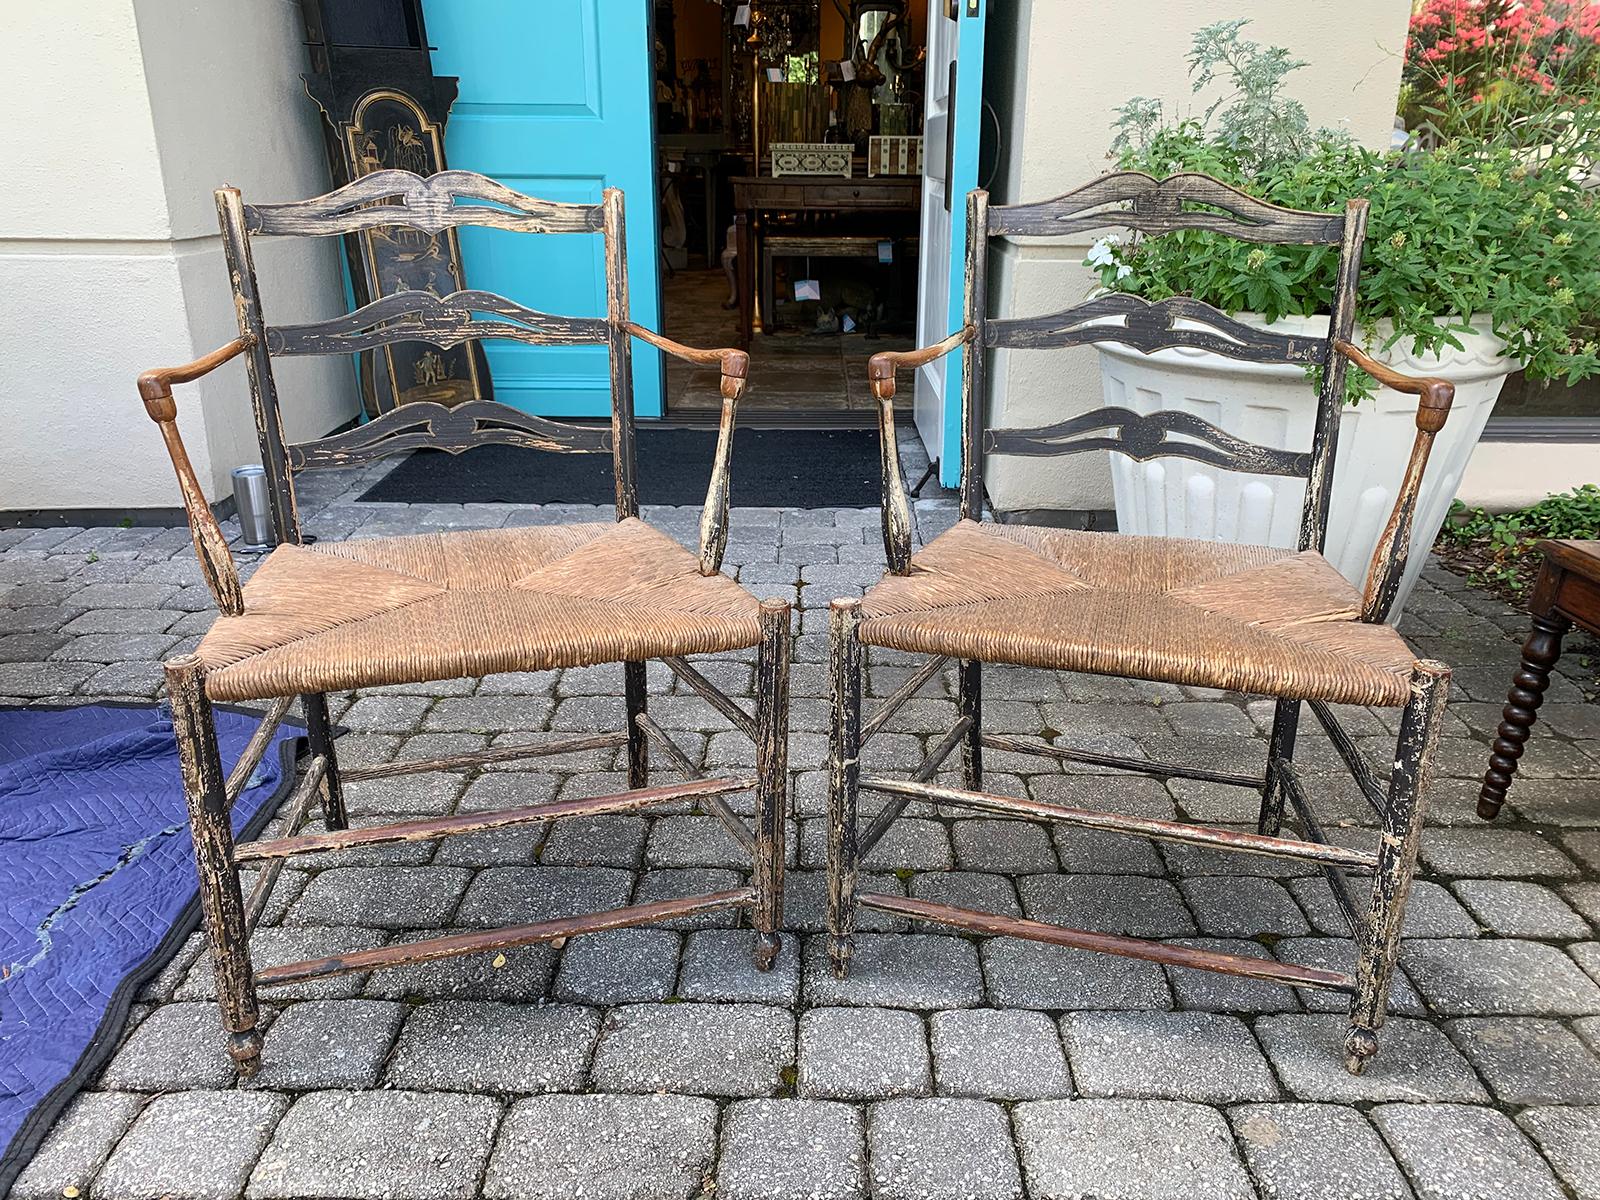 Pair of 19th century French armchairs with rush seats
Perfect aged finish
Measures: 23